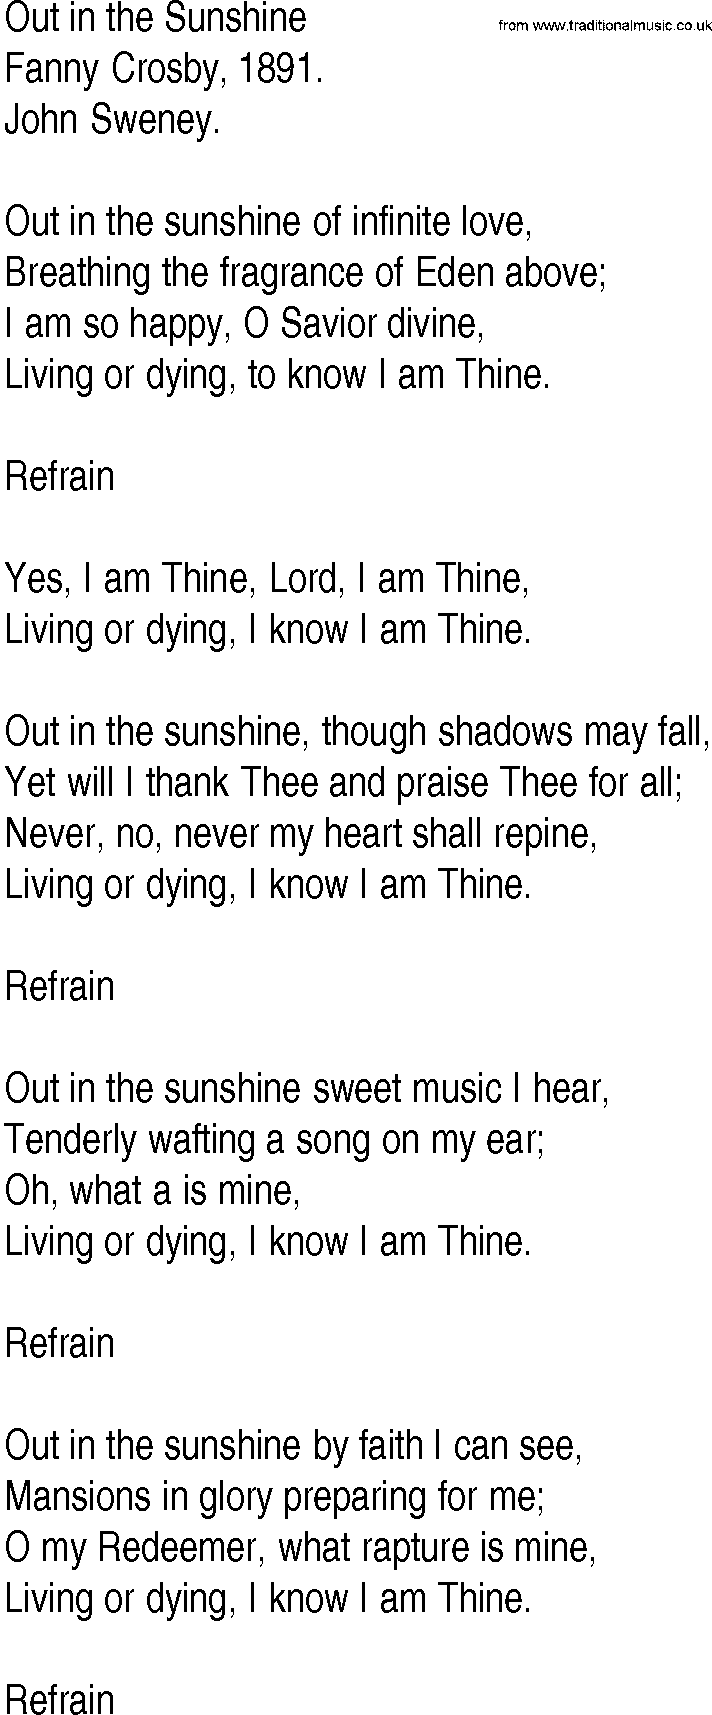 Hymn and Gospel Song: Out in the Sunshine by Fanny Crosby lyrics